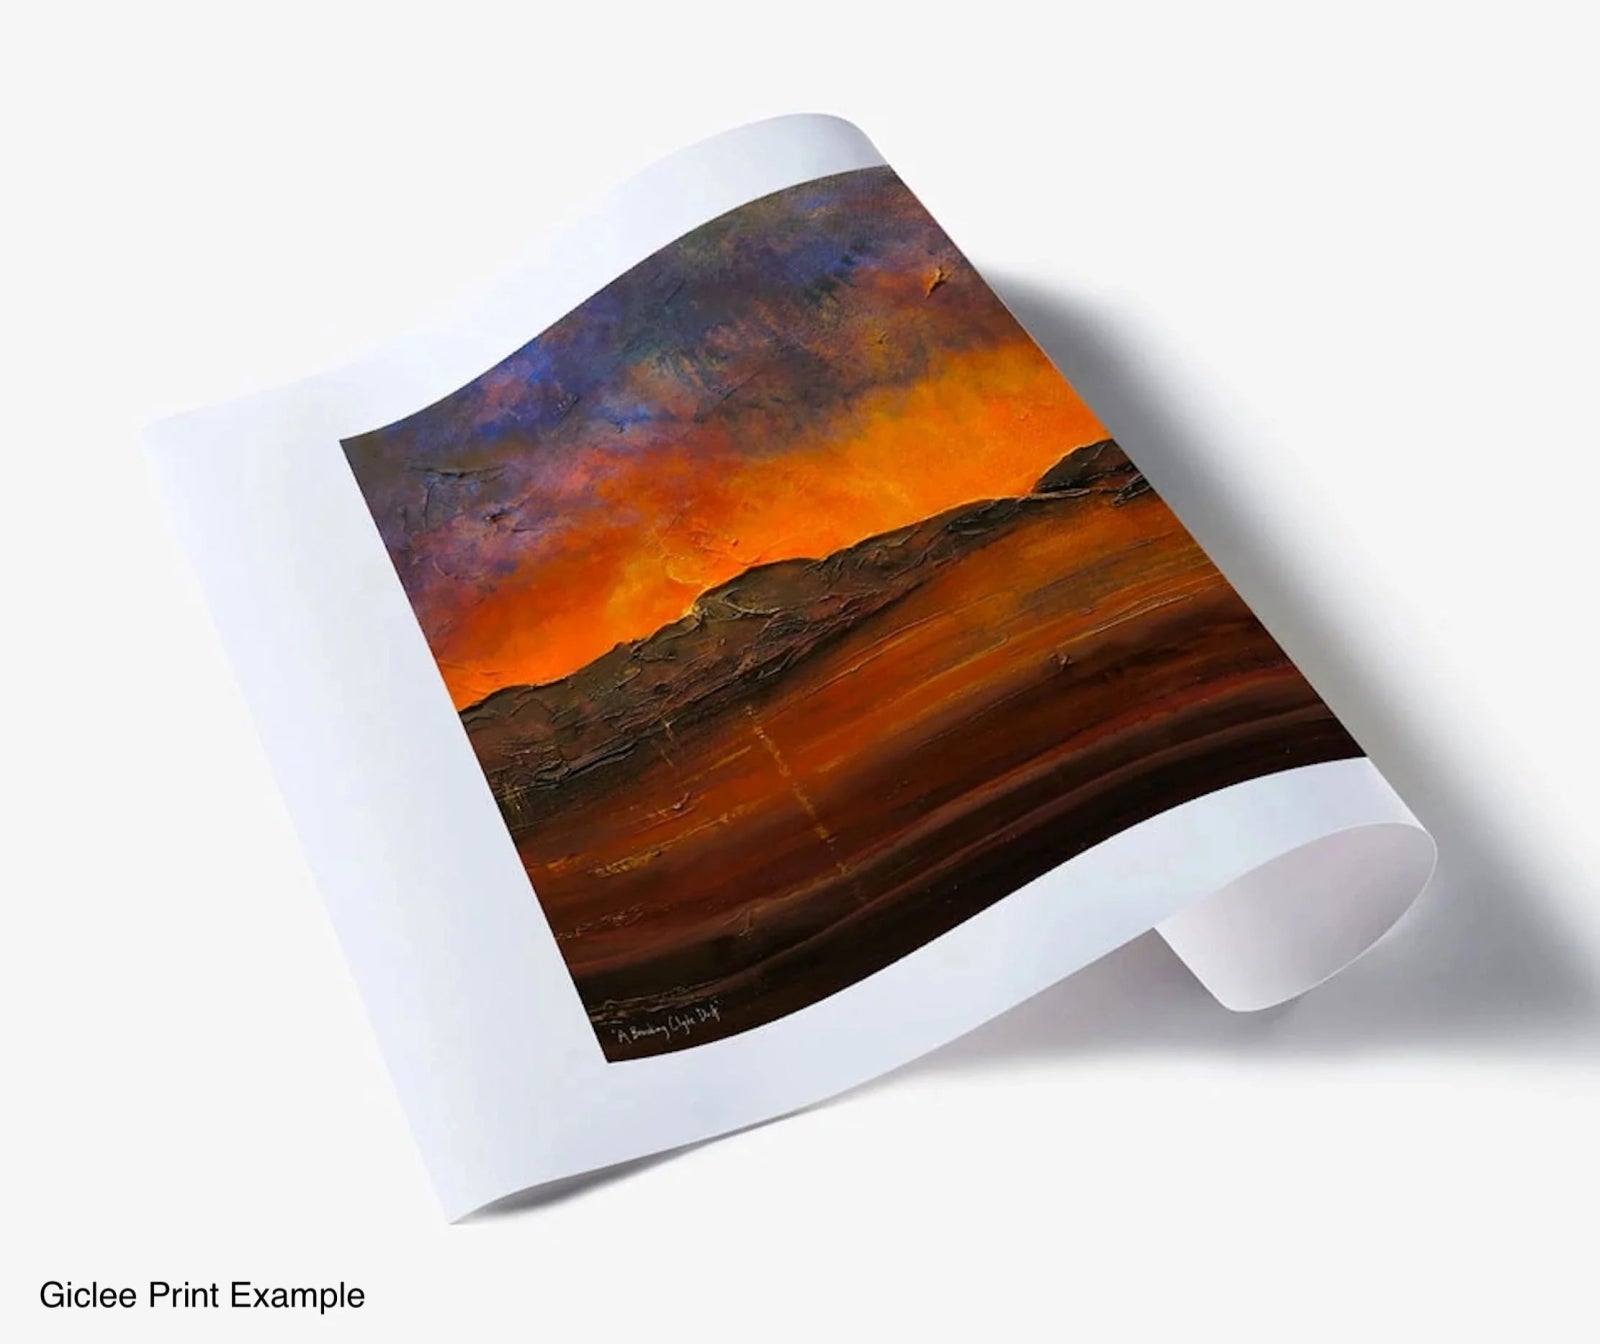 Dumbarton Rock Deep Dusk-Panoramic Prints-River Clyde Art Gallery-Paintings, Prints, Homeware, Art Gifts From Scotland By Scottish Artist Kevin Hunter